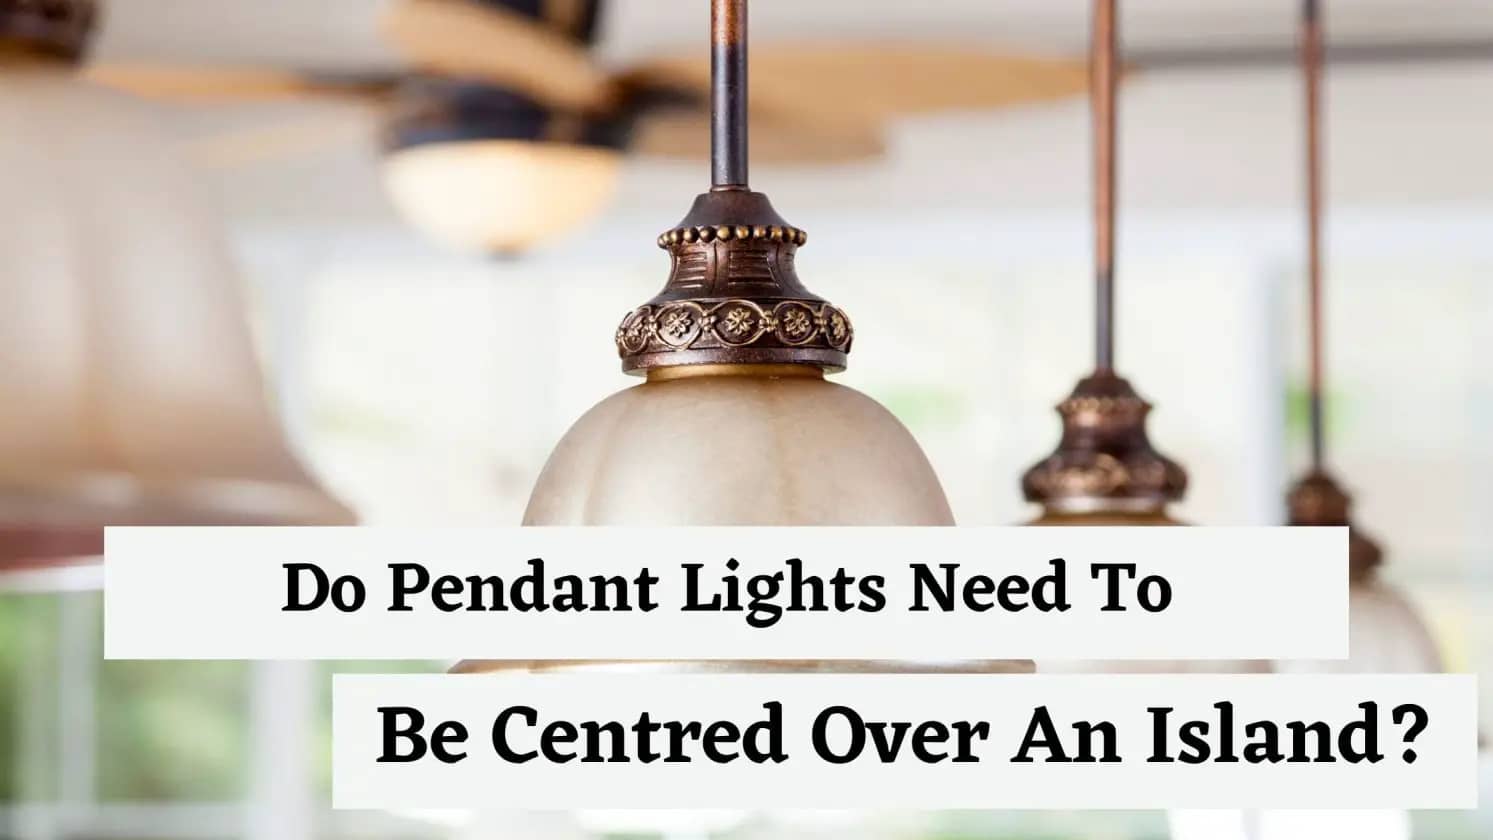 Do pendant lights need to be centred over an island?